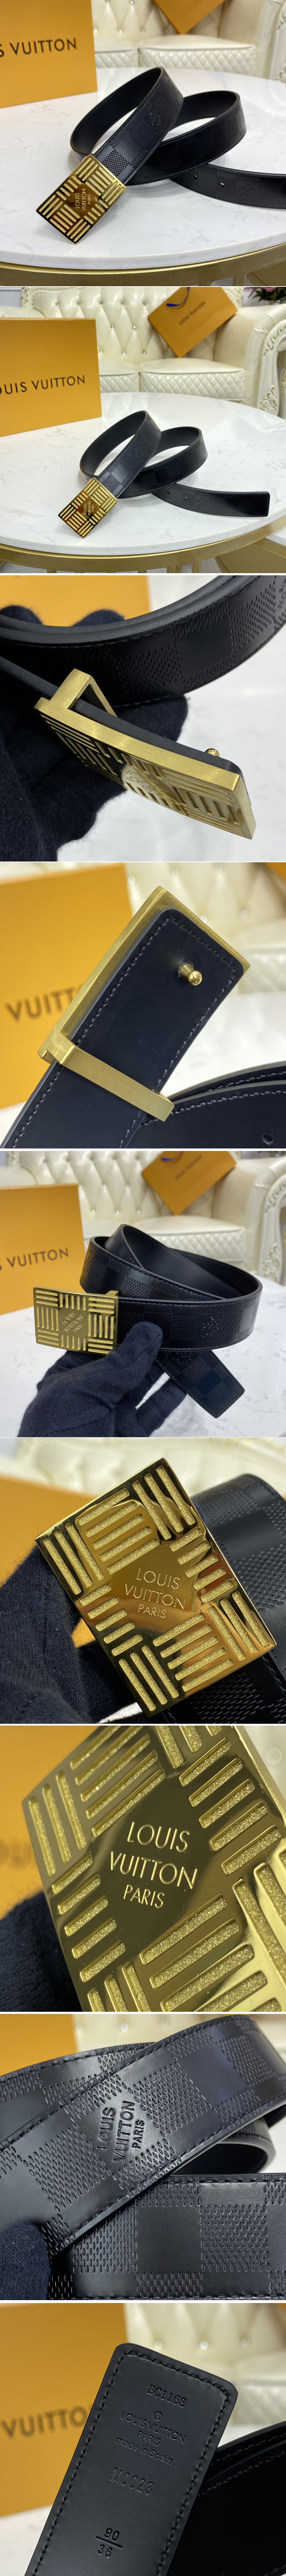 Replica Louis Vuitton M0023U LV Damier Plate 35mm reversible belt in Damier Infini With Gold Buckle